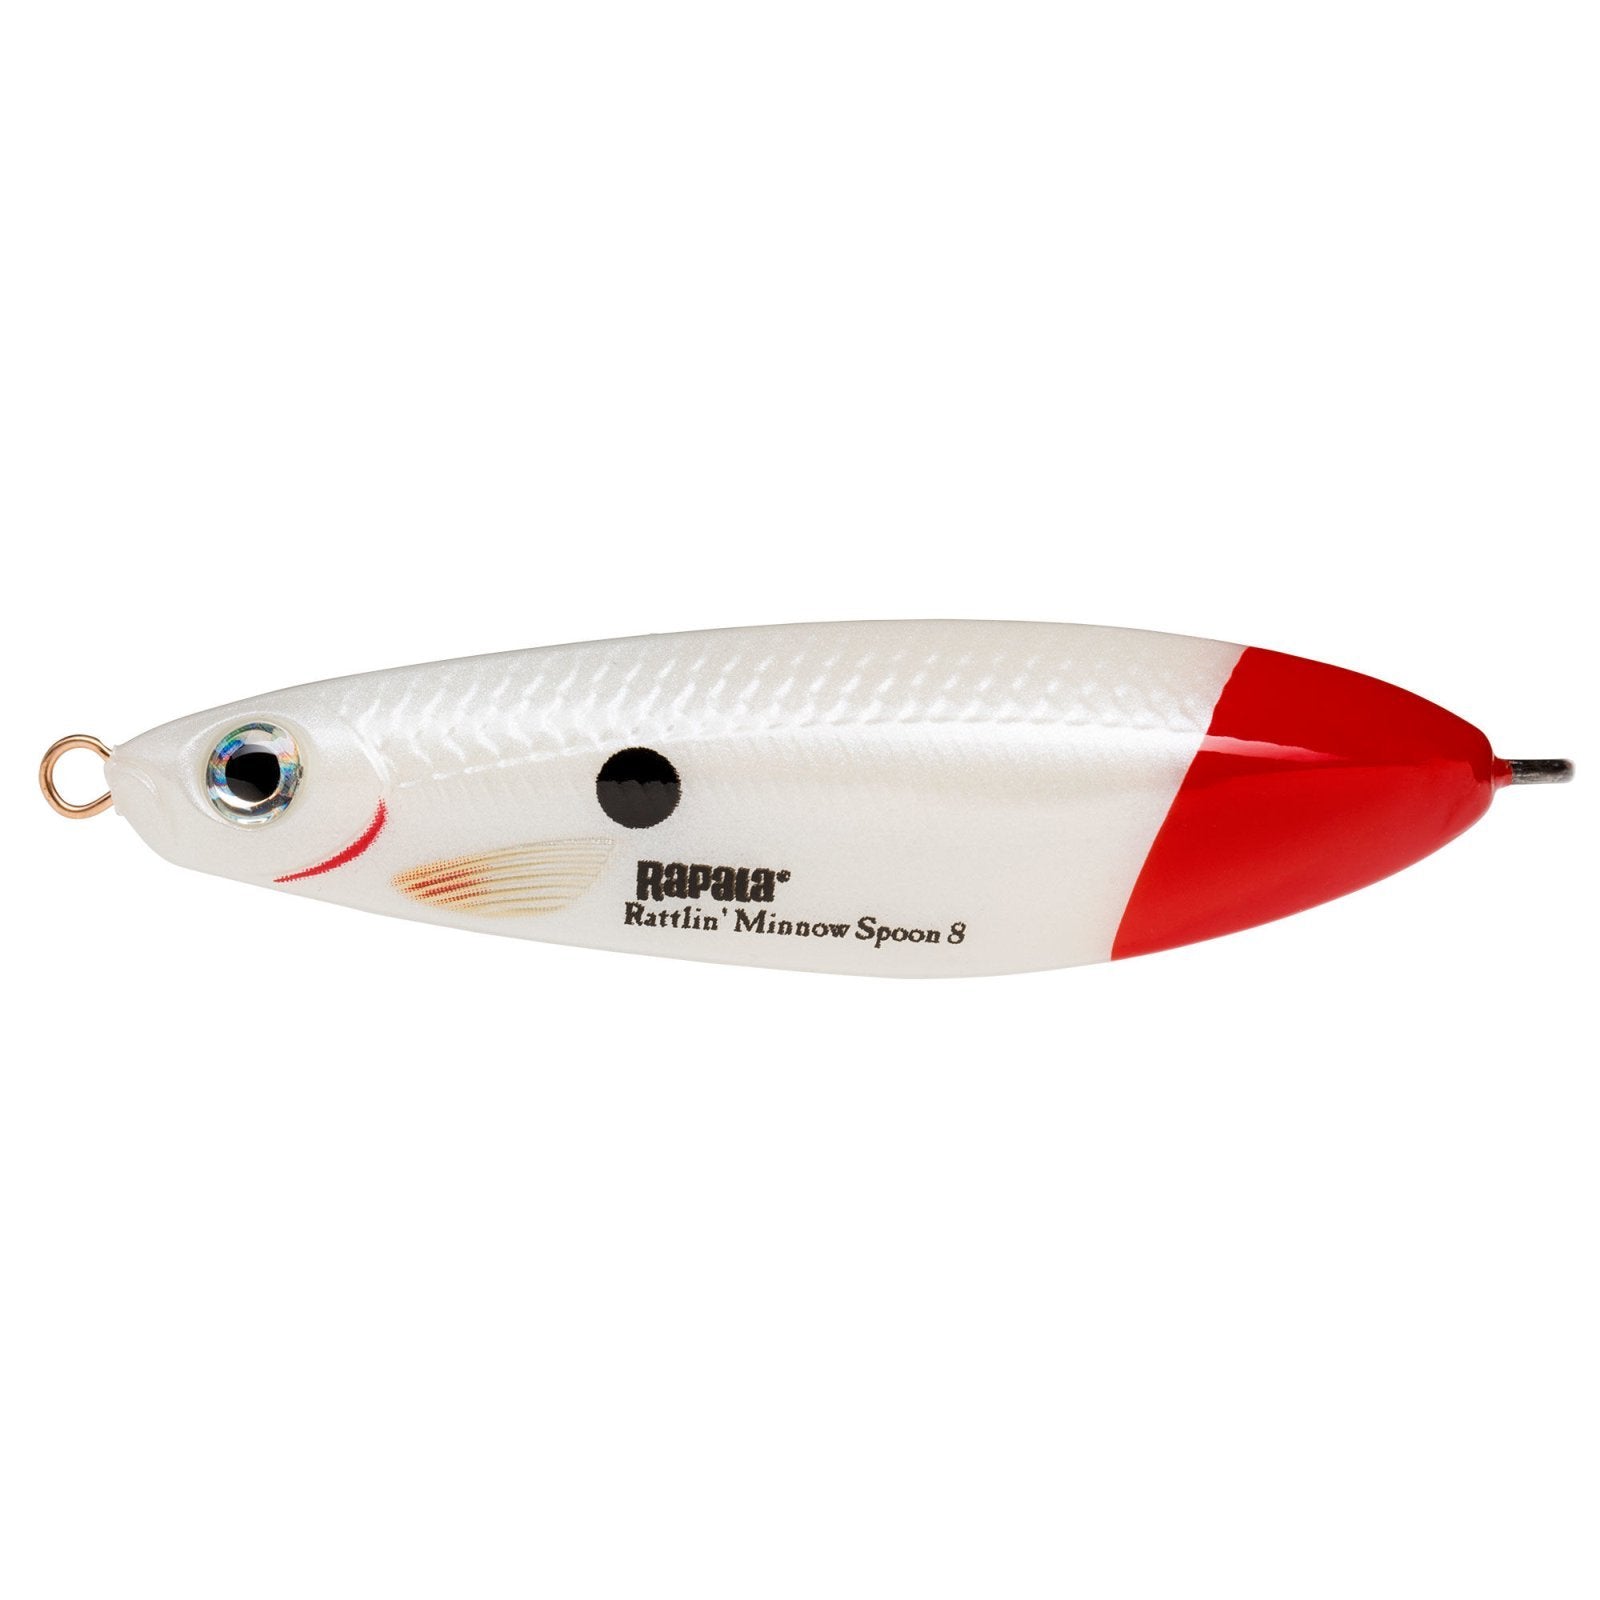 Rapala Rattlin Minnow Spoon 8 PWRT Pearl White Red Tail